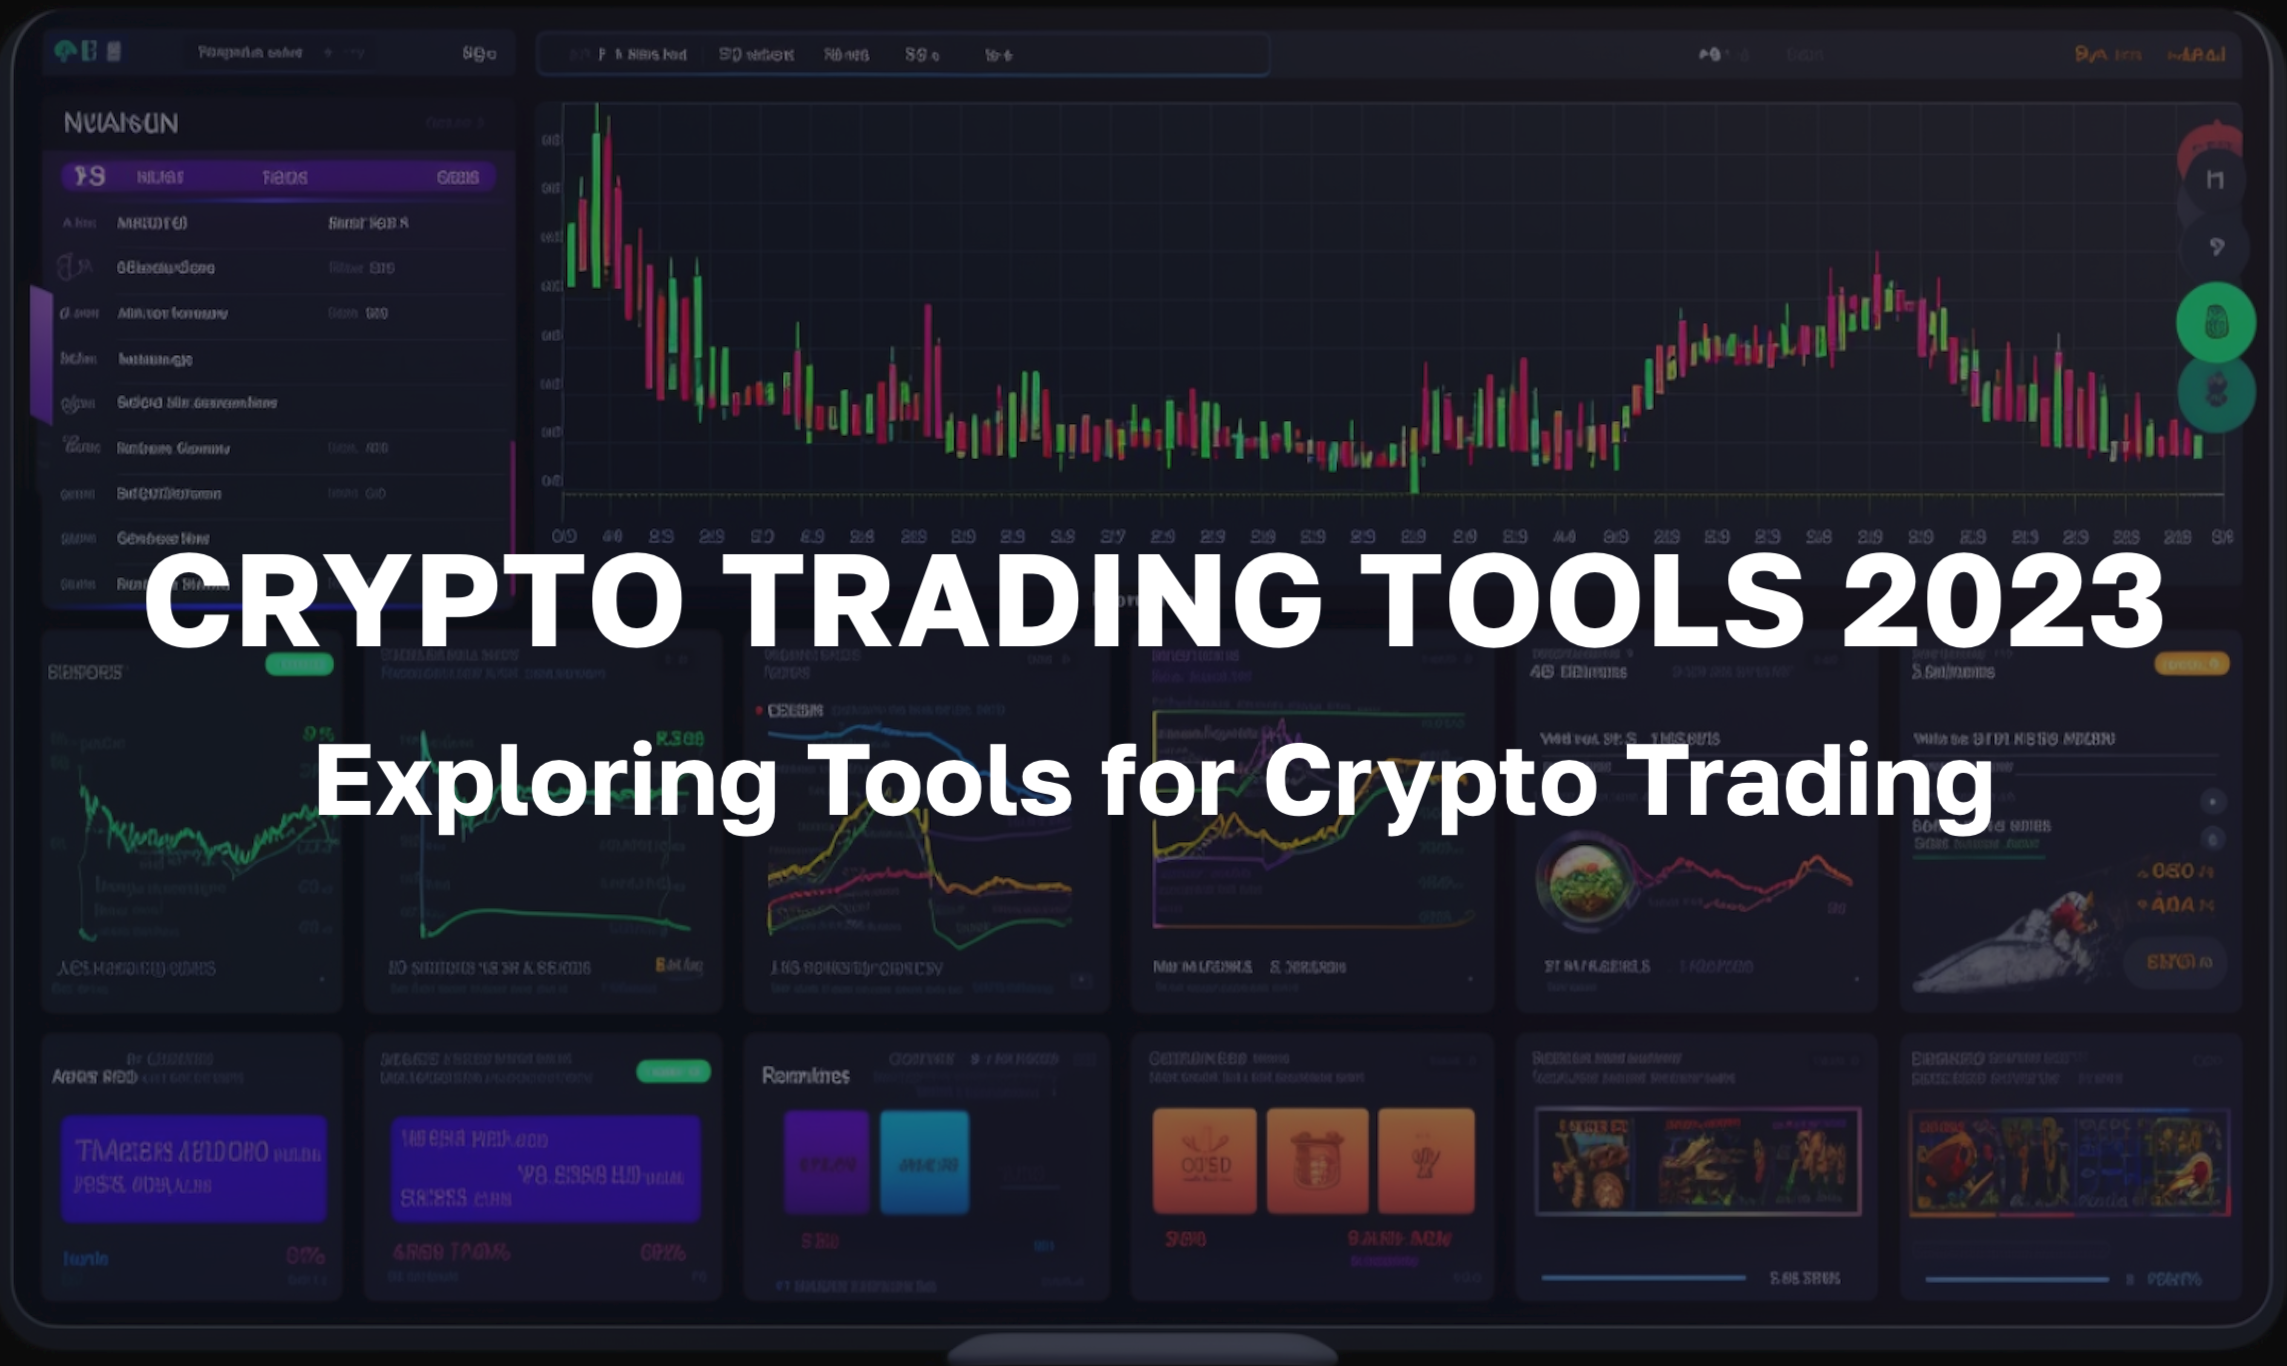 Crypto Trading Tools in 2023 - Exploring Tools for Crypto Trading